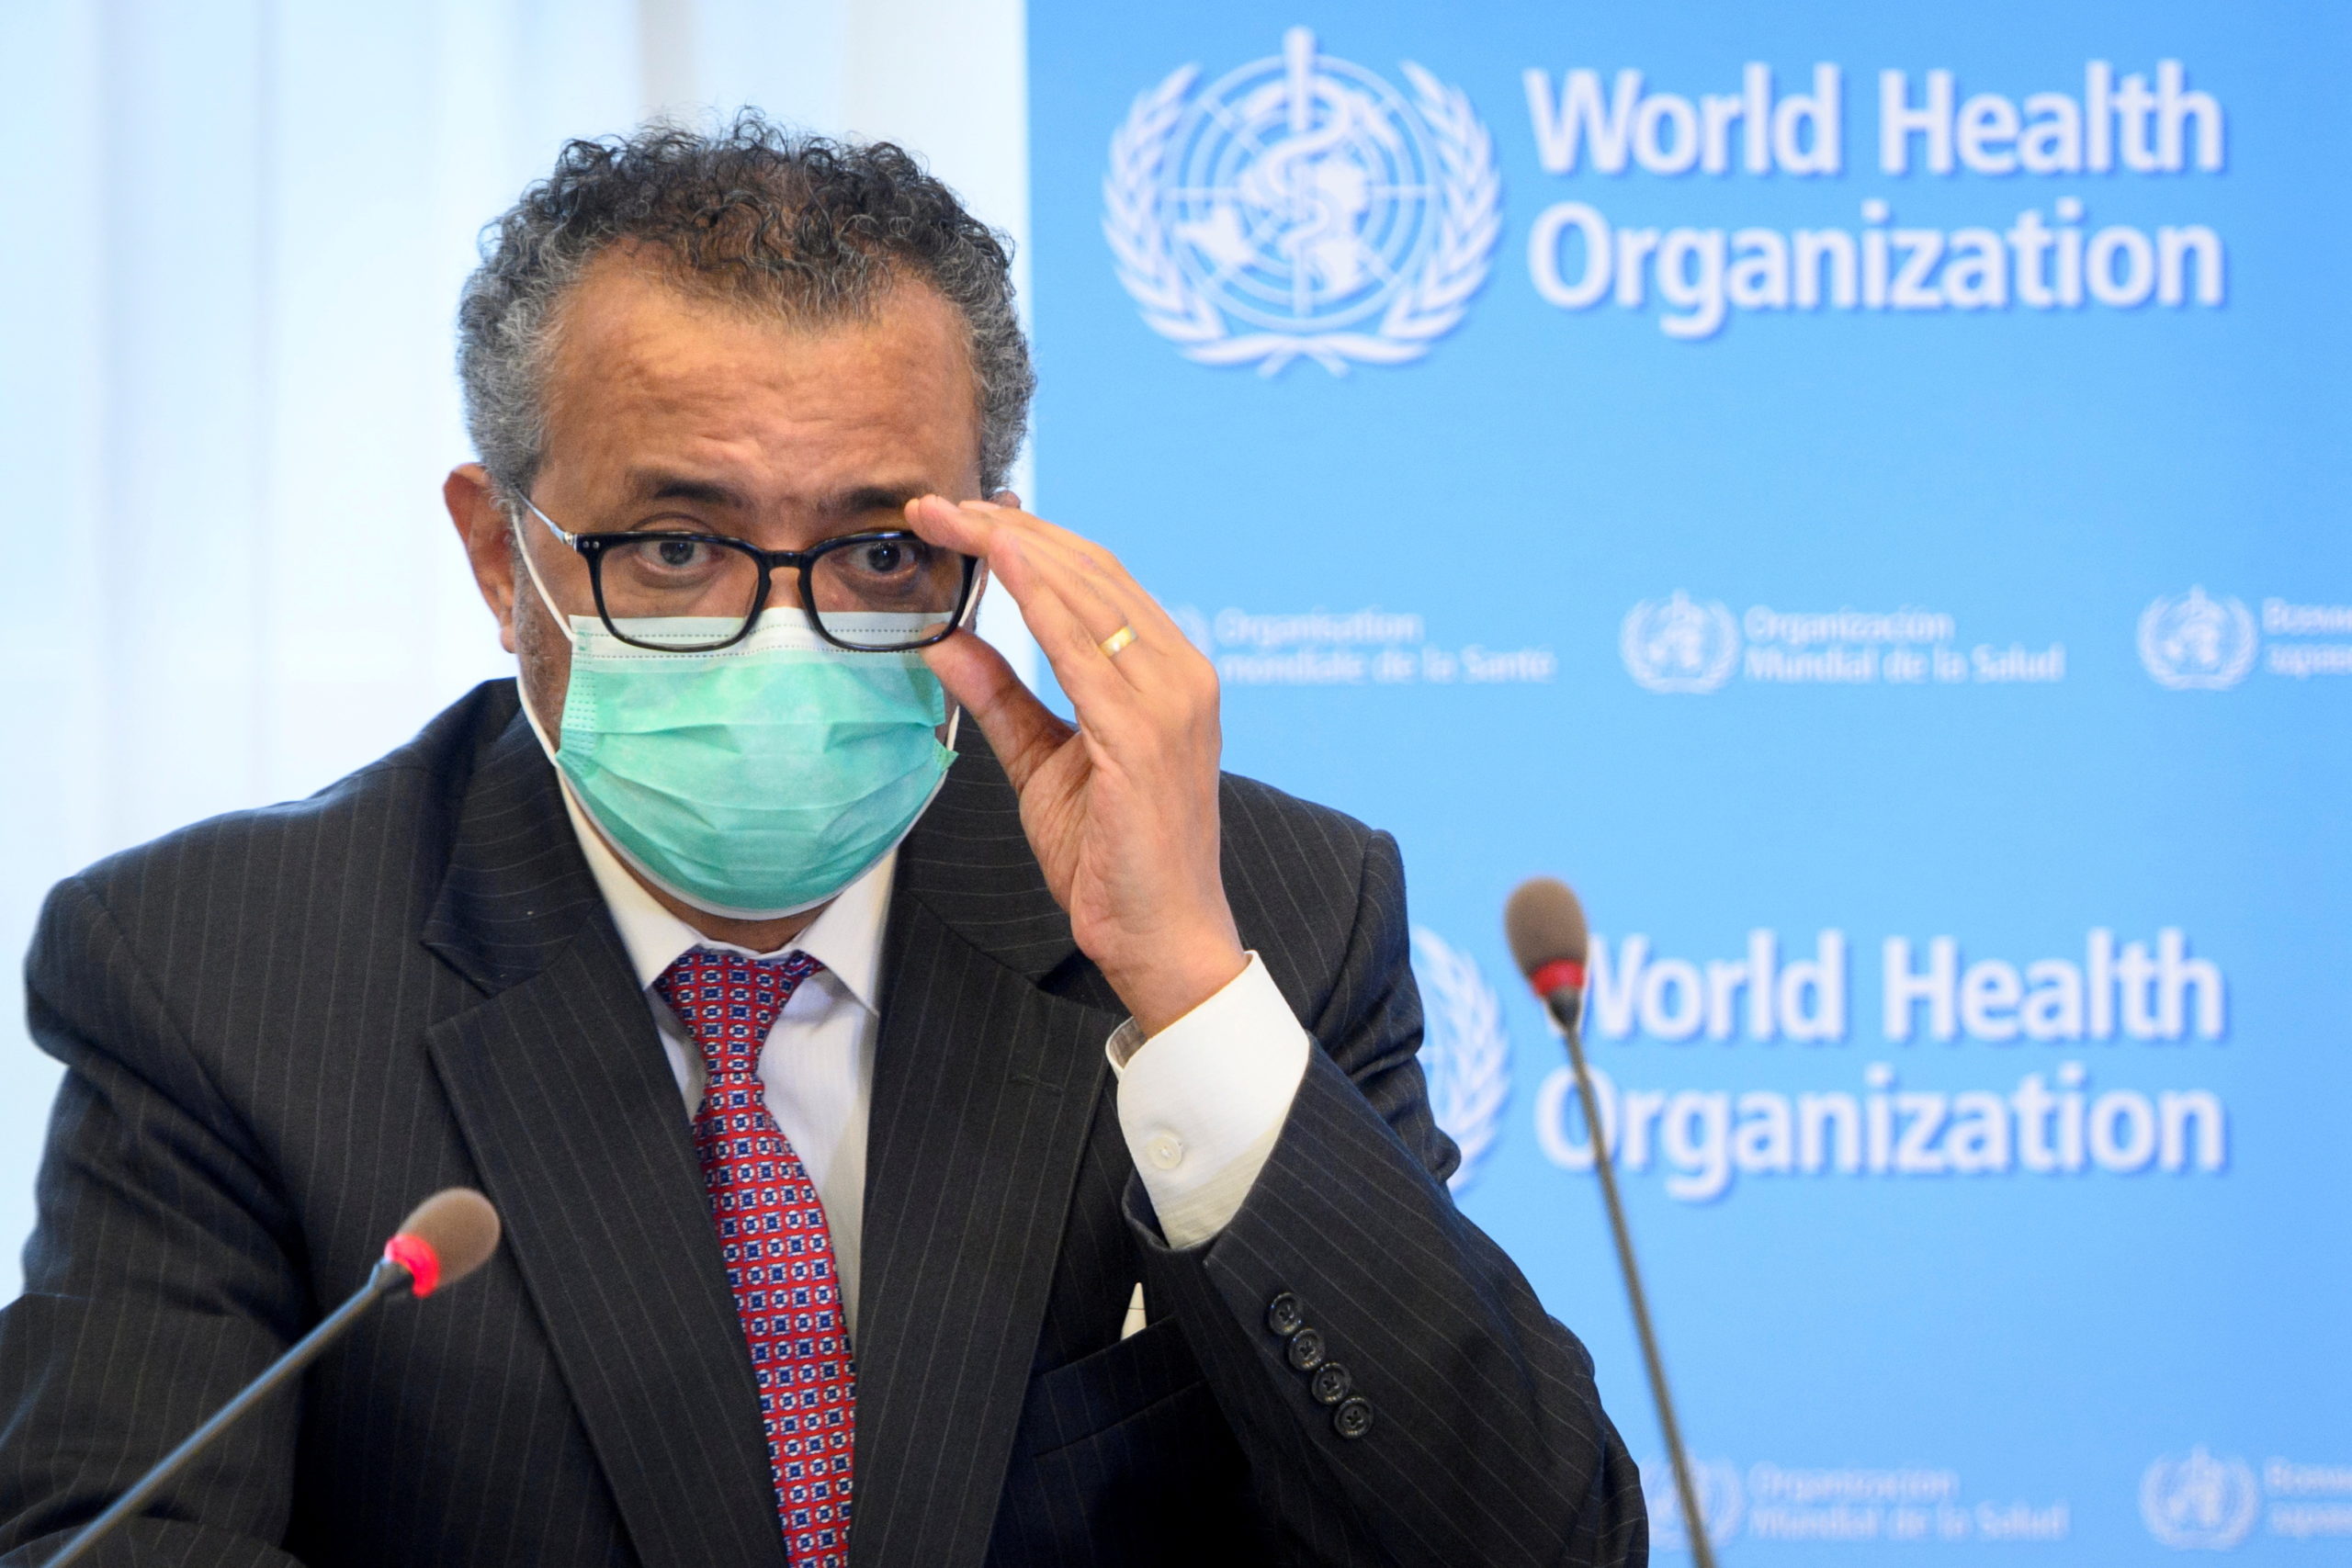 World Health Organization (WHO) Director General Tedros Adhanom Ghebreyesus speaks during a bilateral meeting with Swiss Interior and Health Minister Alain Berset on the sidelines of the opening of the 74th World Health Assembly at the WHO headquarters, in Geneva, Switzerland May 24, 2021. Laurent Gillieron/Pool via REUTERS